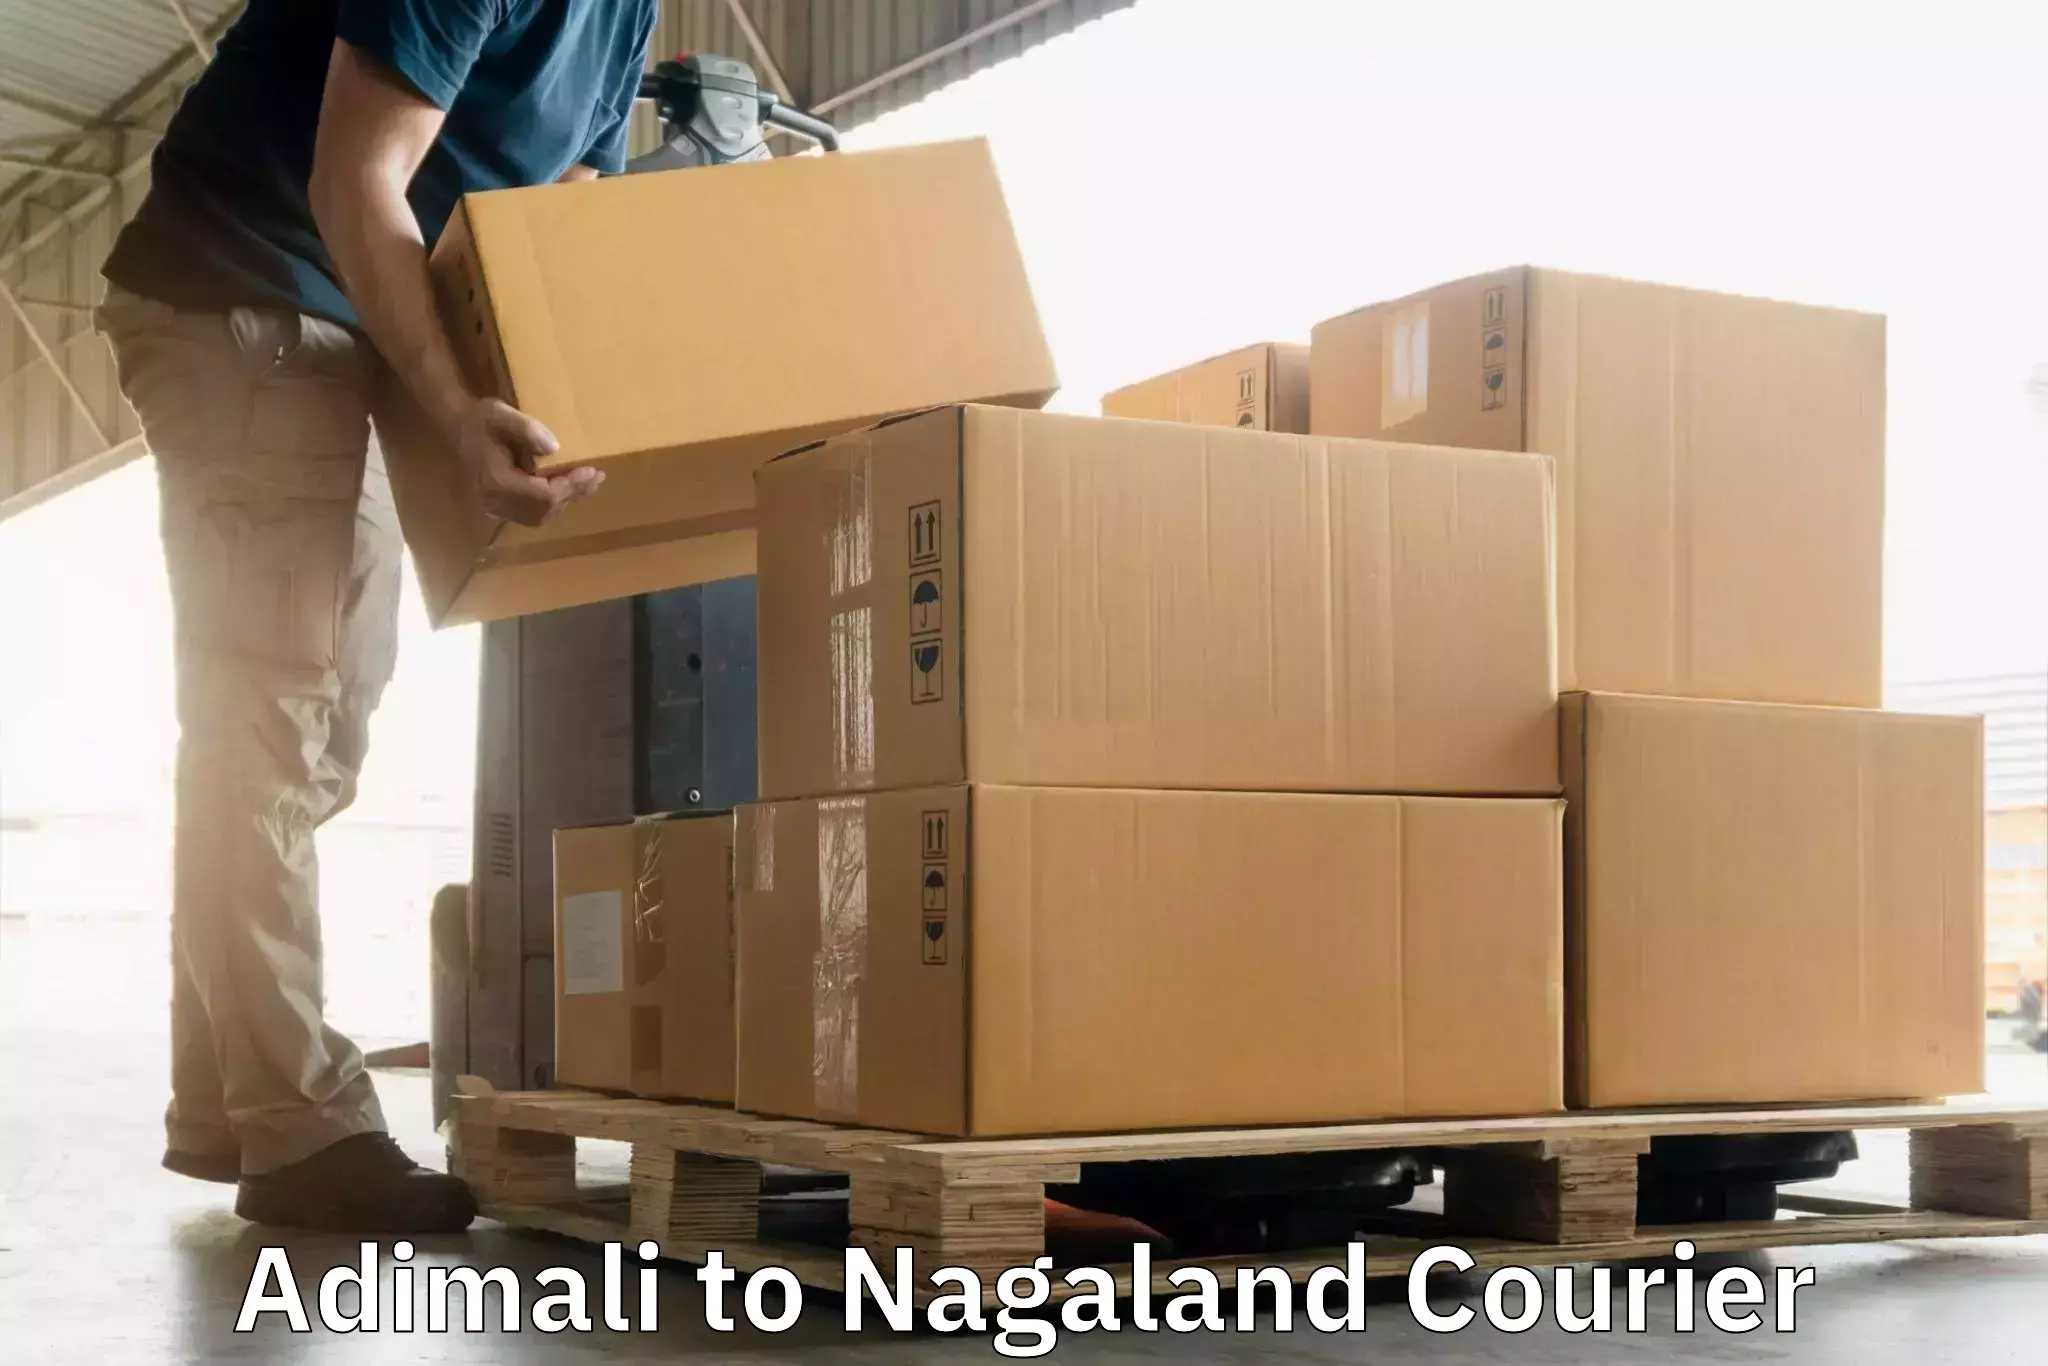 Flexible delivery scheduling Adimali to Nagaland